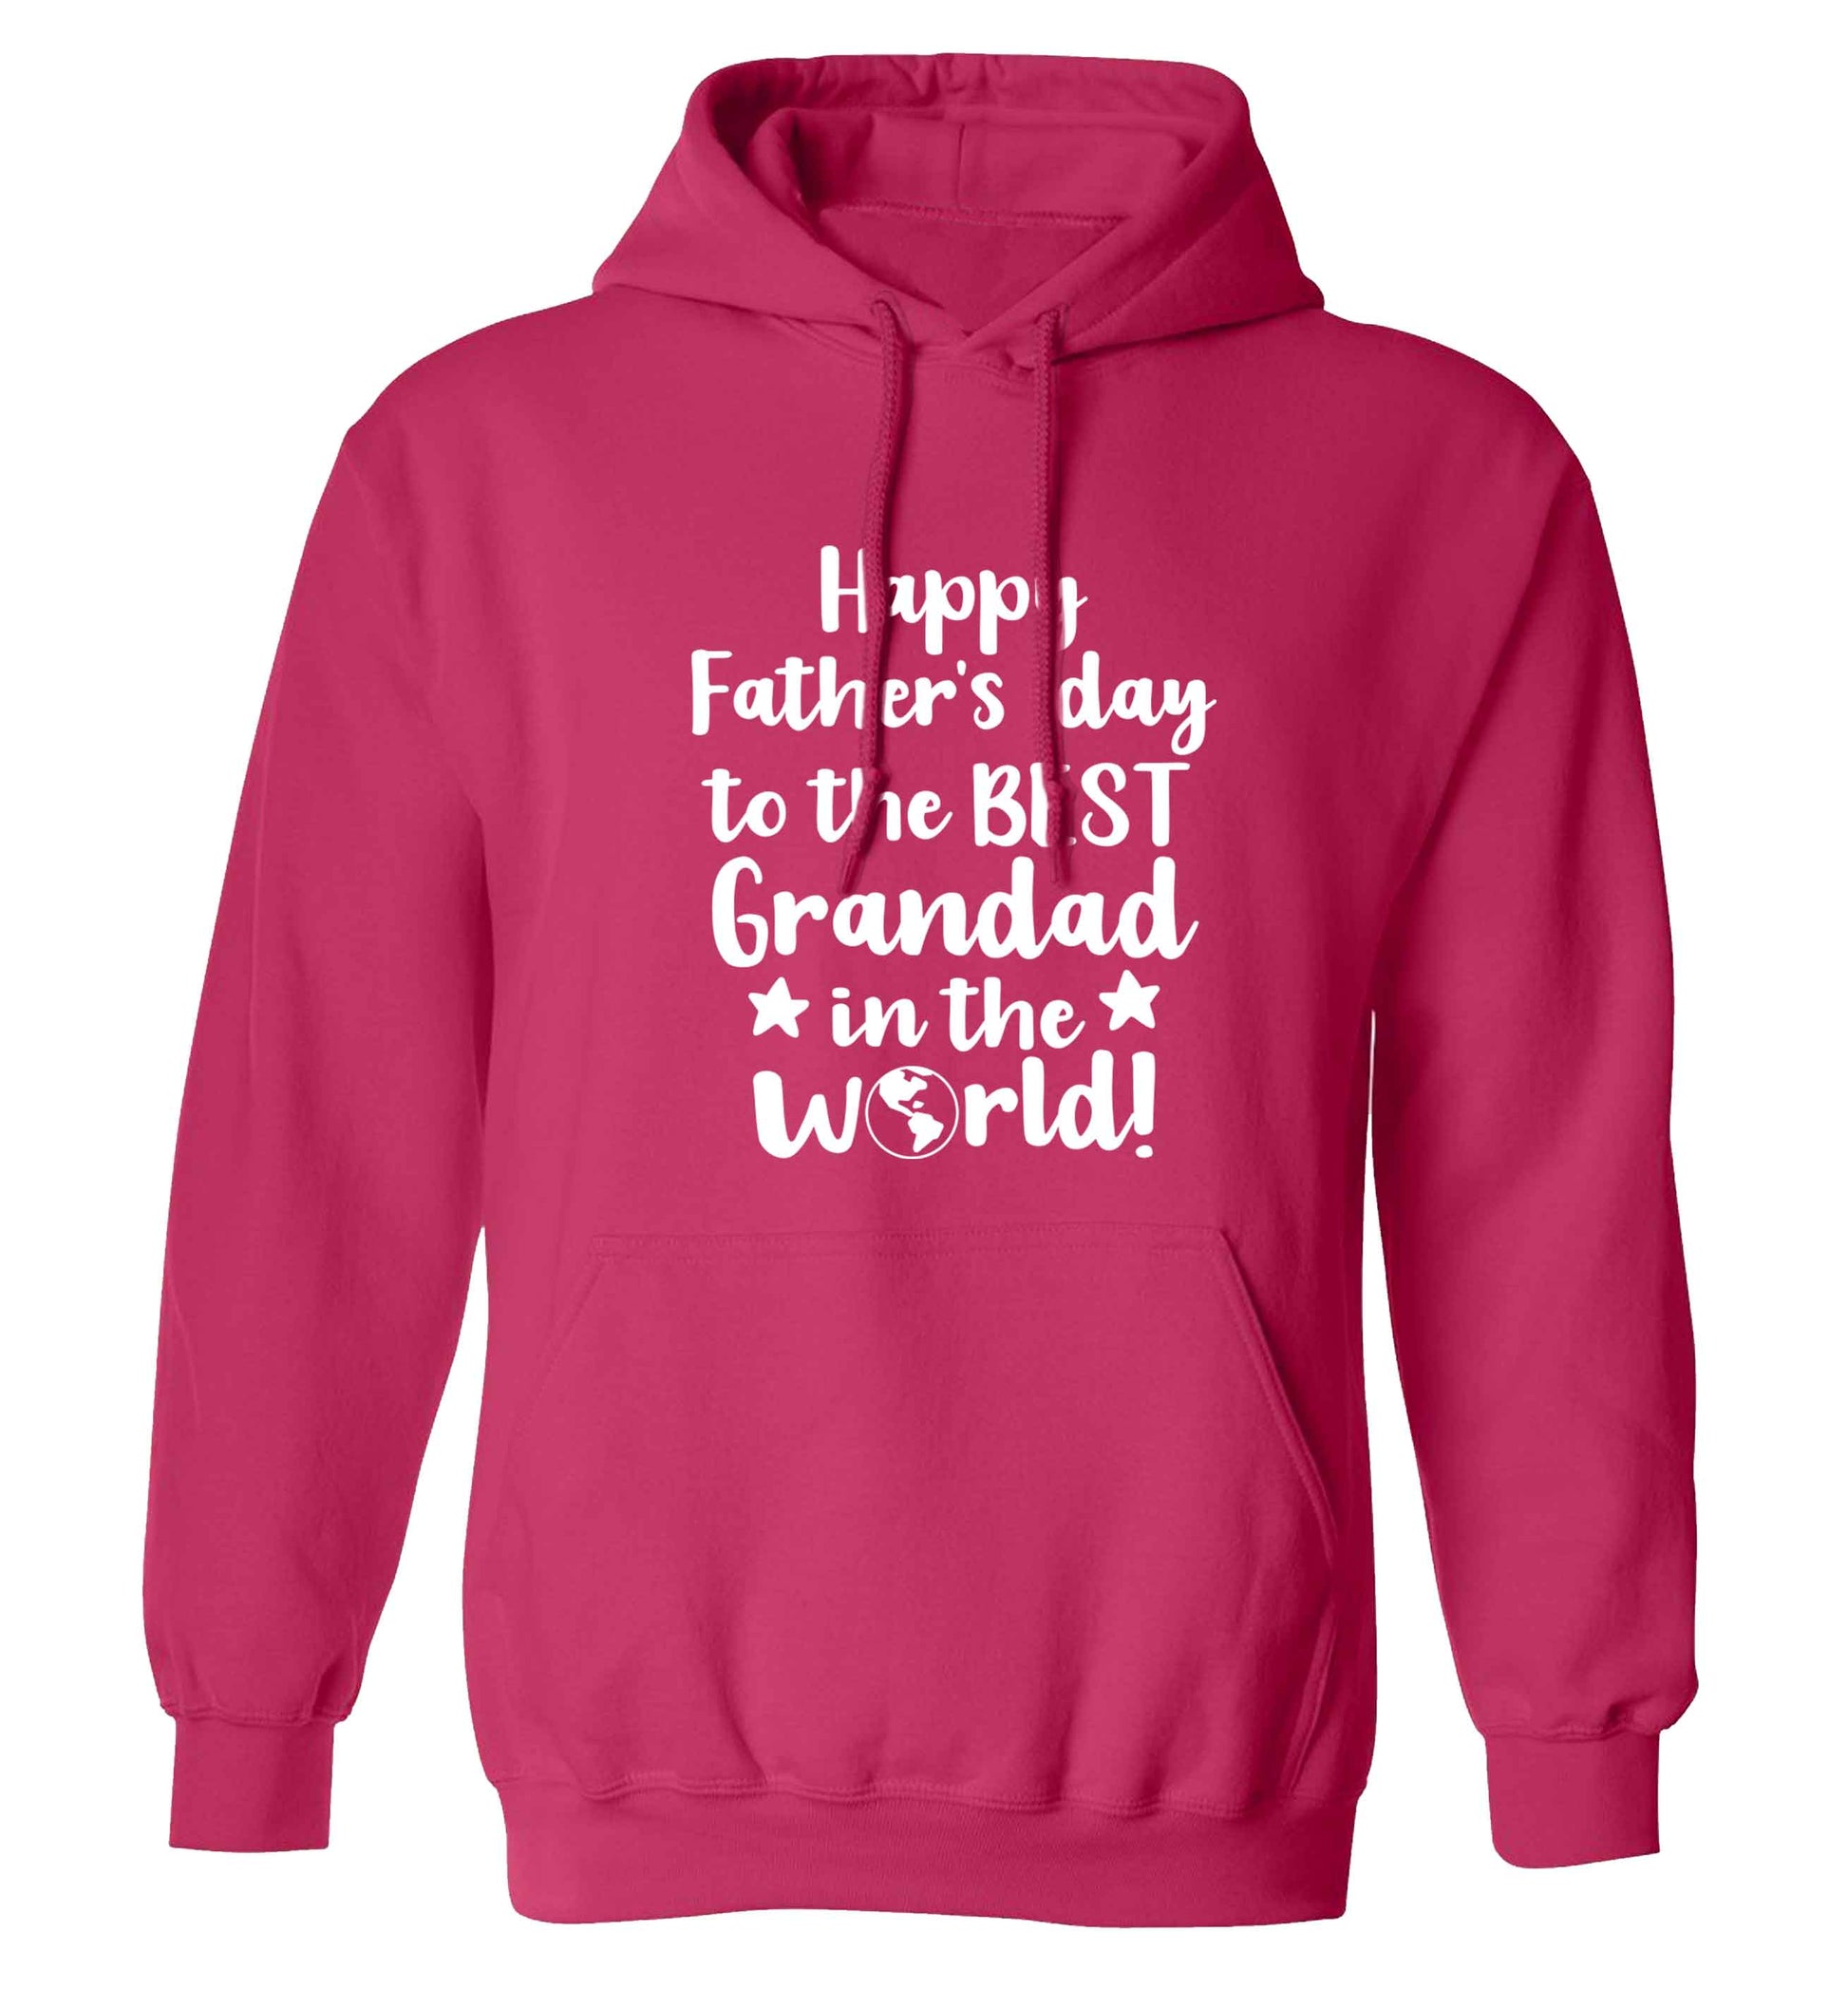 Happy Father's day to the best grandad in the world adults unisex pink hoodie 2XL